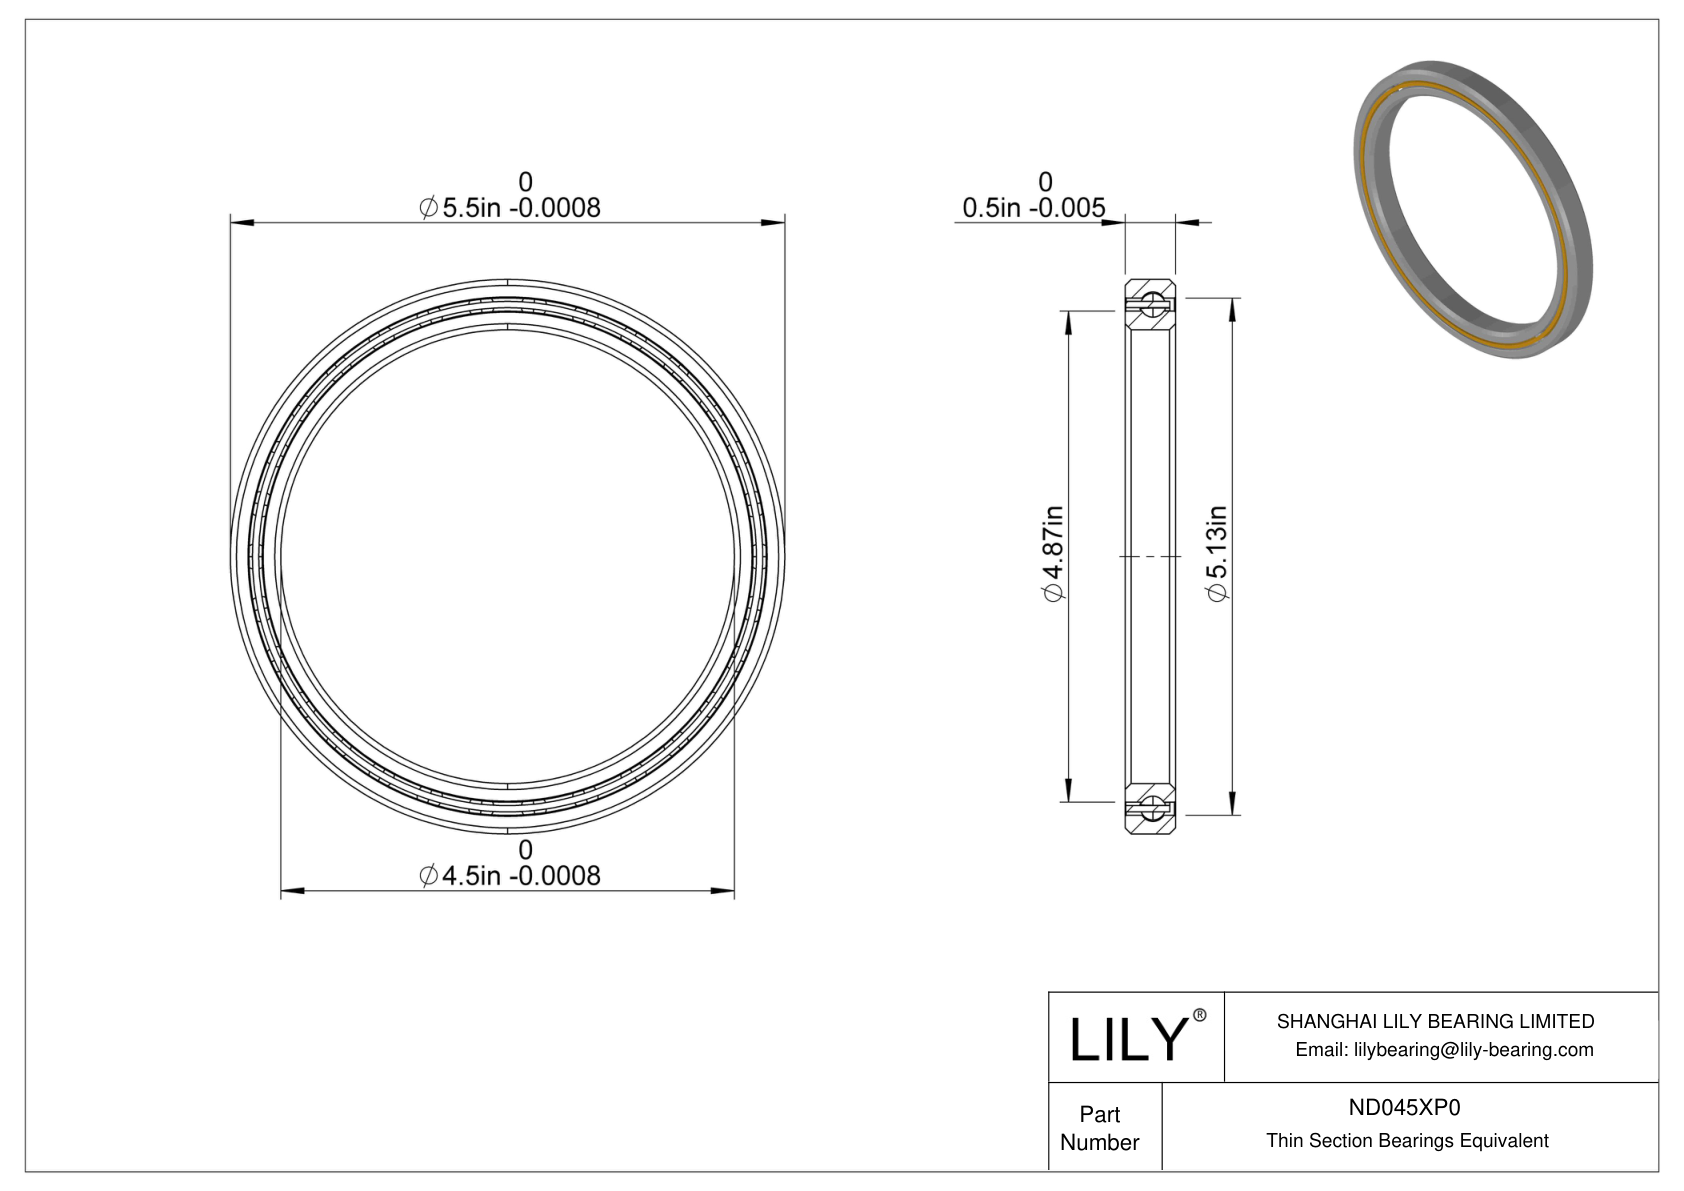 ND045XP0 Constant Section (CS) Bearings cad drawing